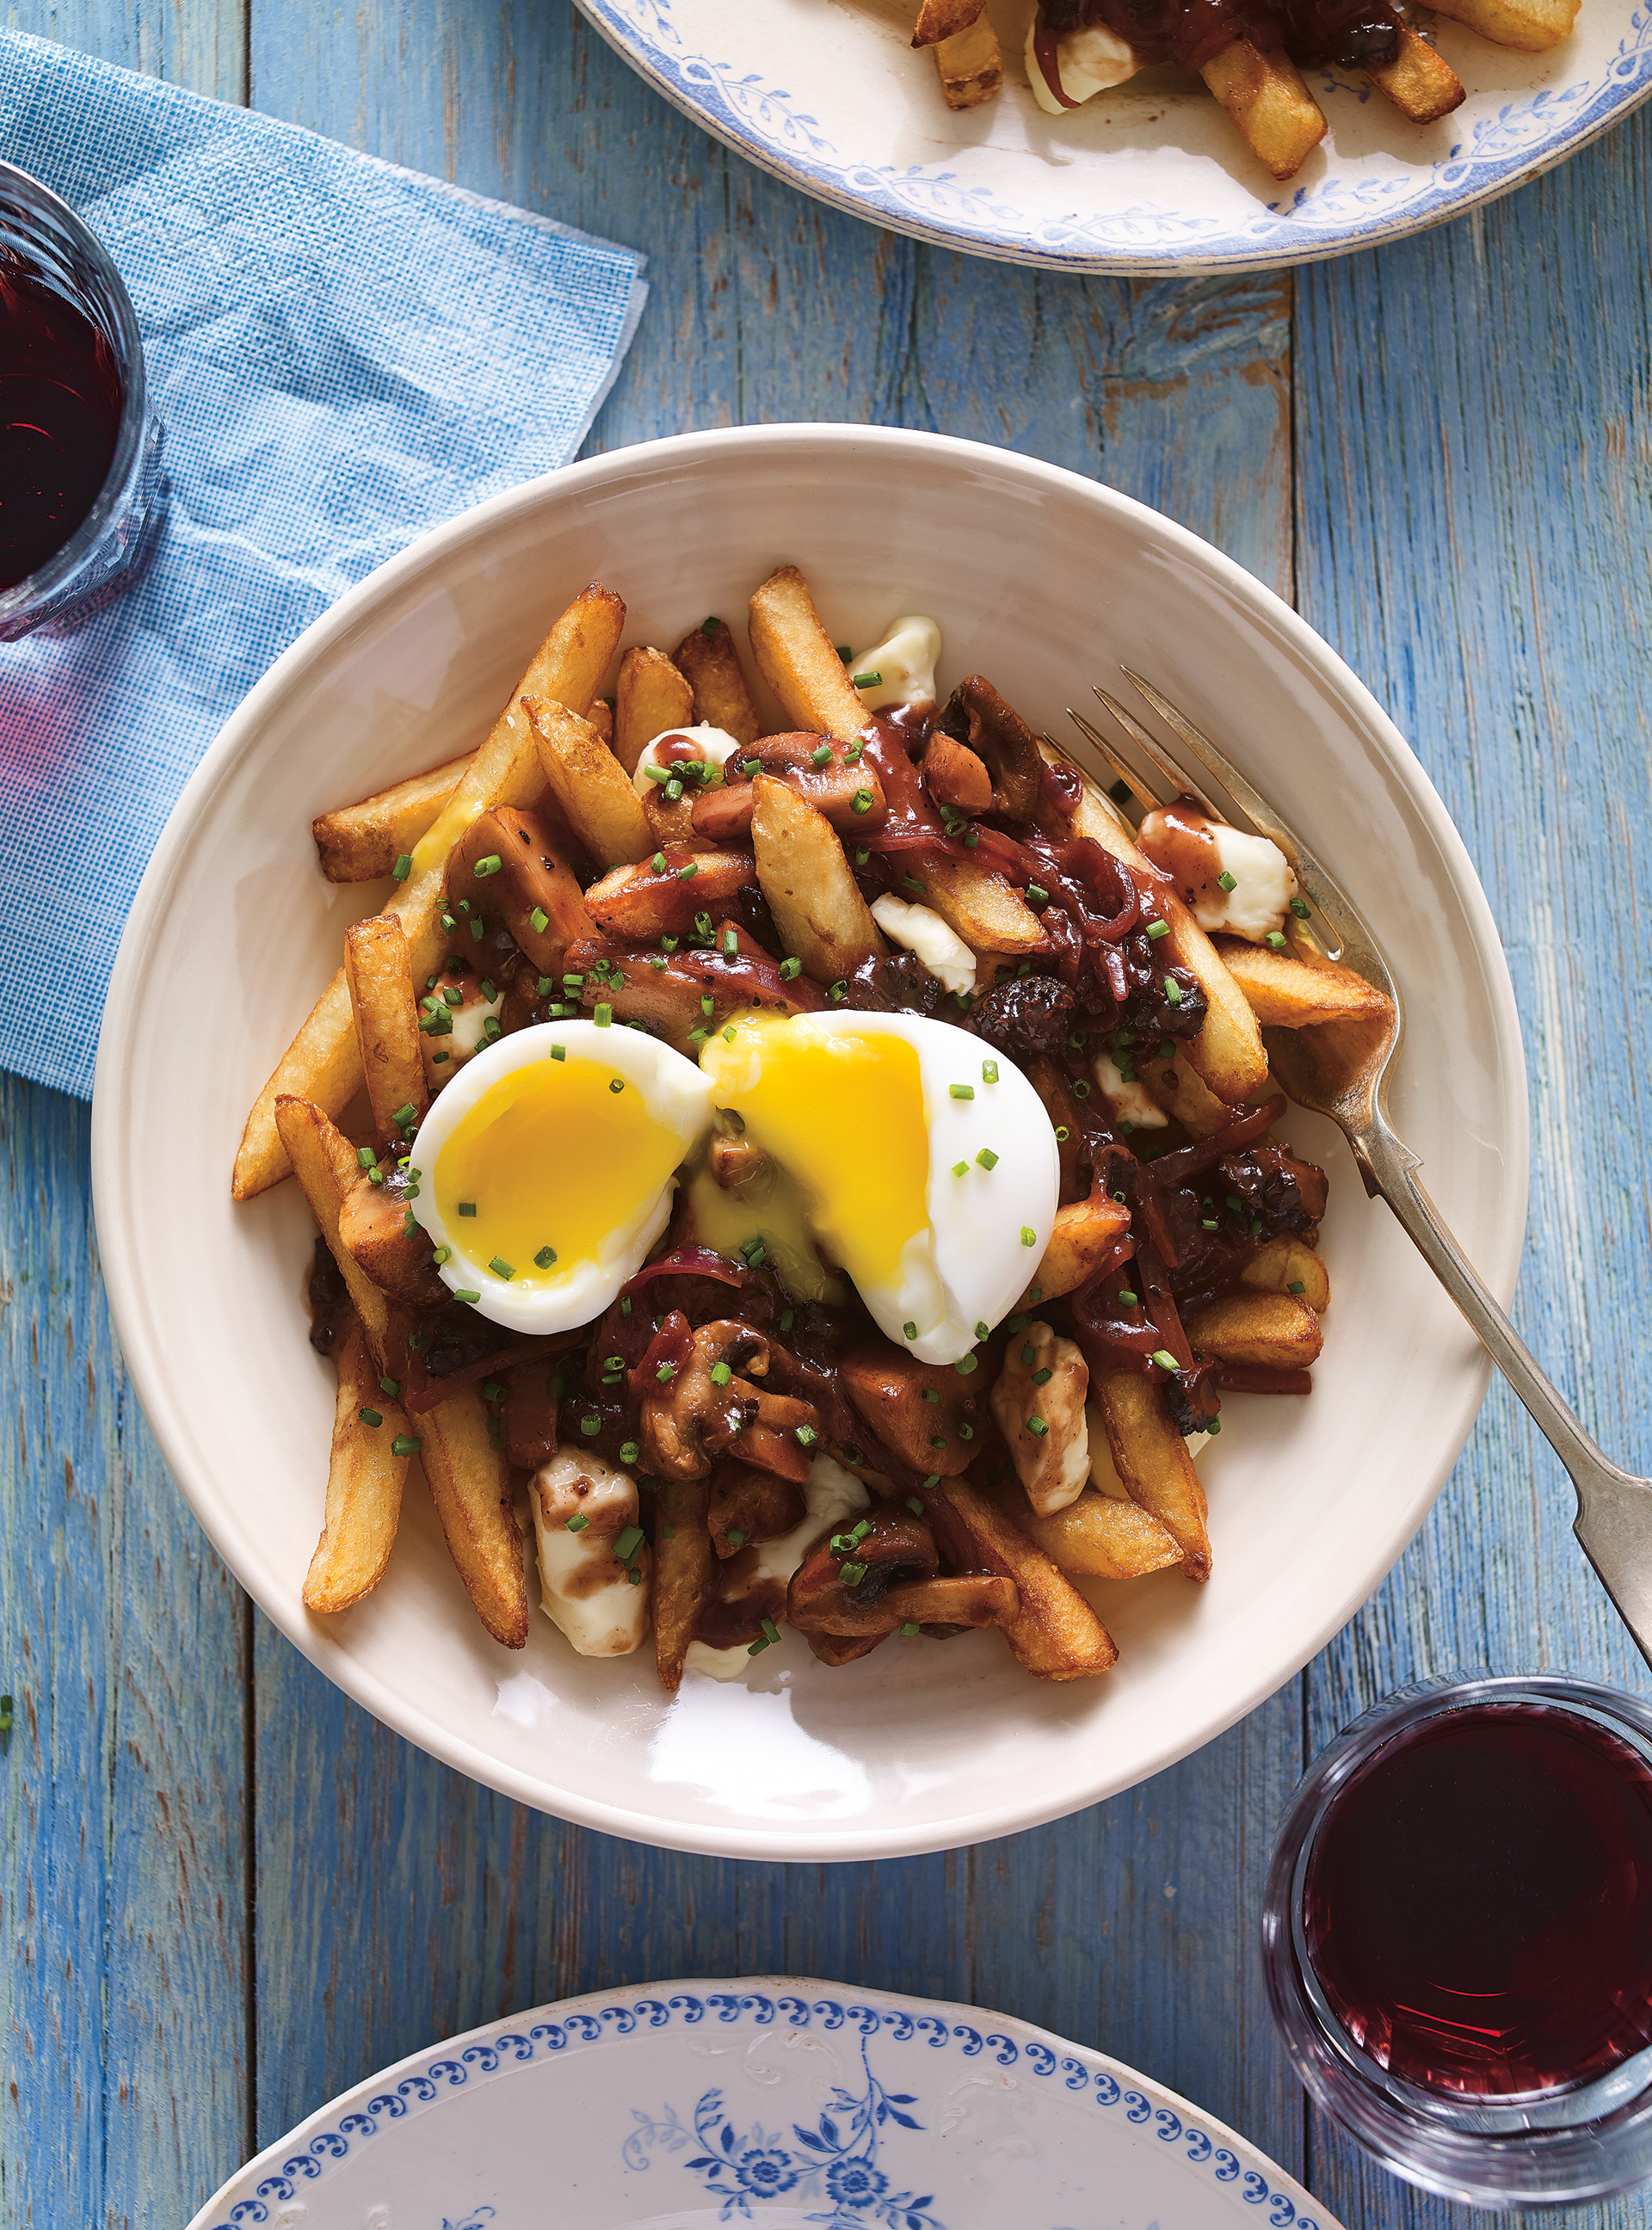 Red Wine and Mushroom Poutine with Soft-Boiled Egg